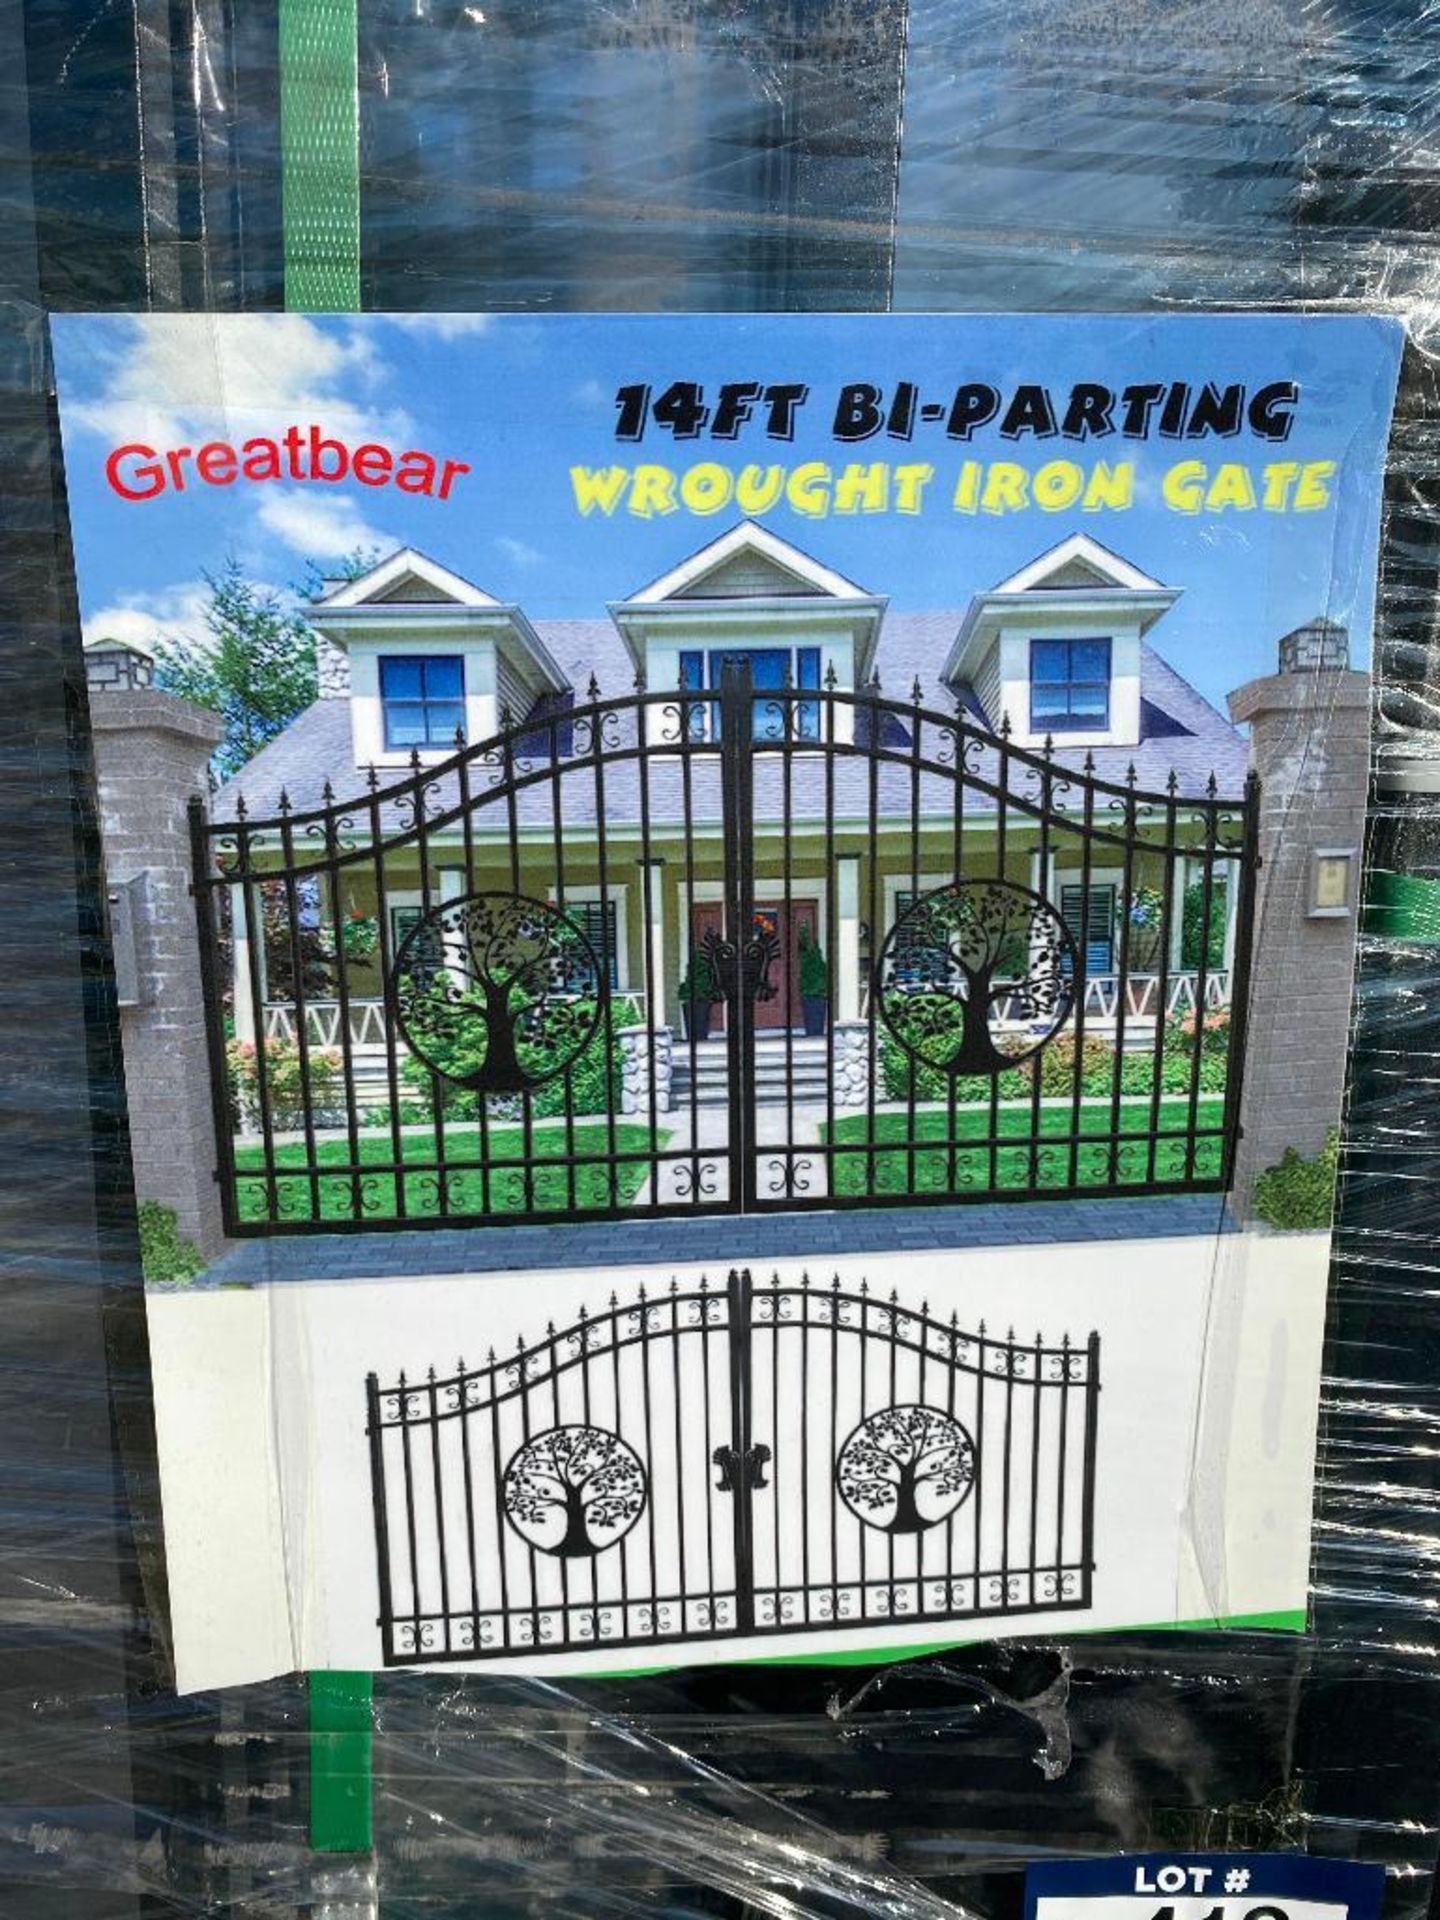 New Greatbear 14' Bi-Parting Wrought Iron Gate with Tree Design - Image 3 of 3